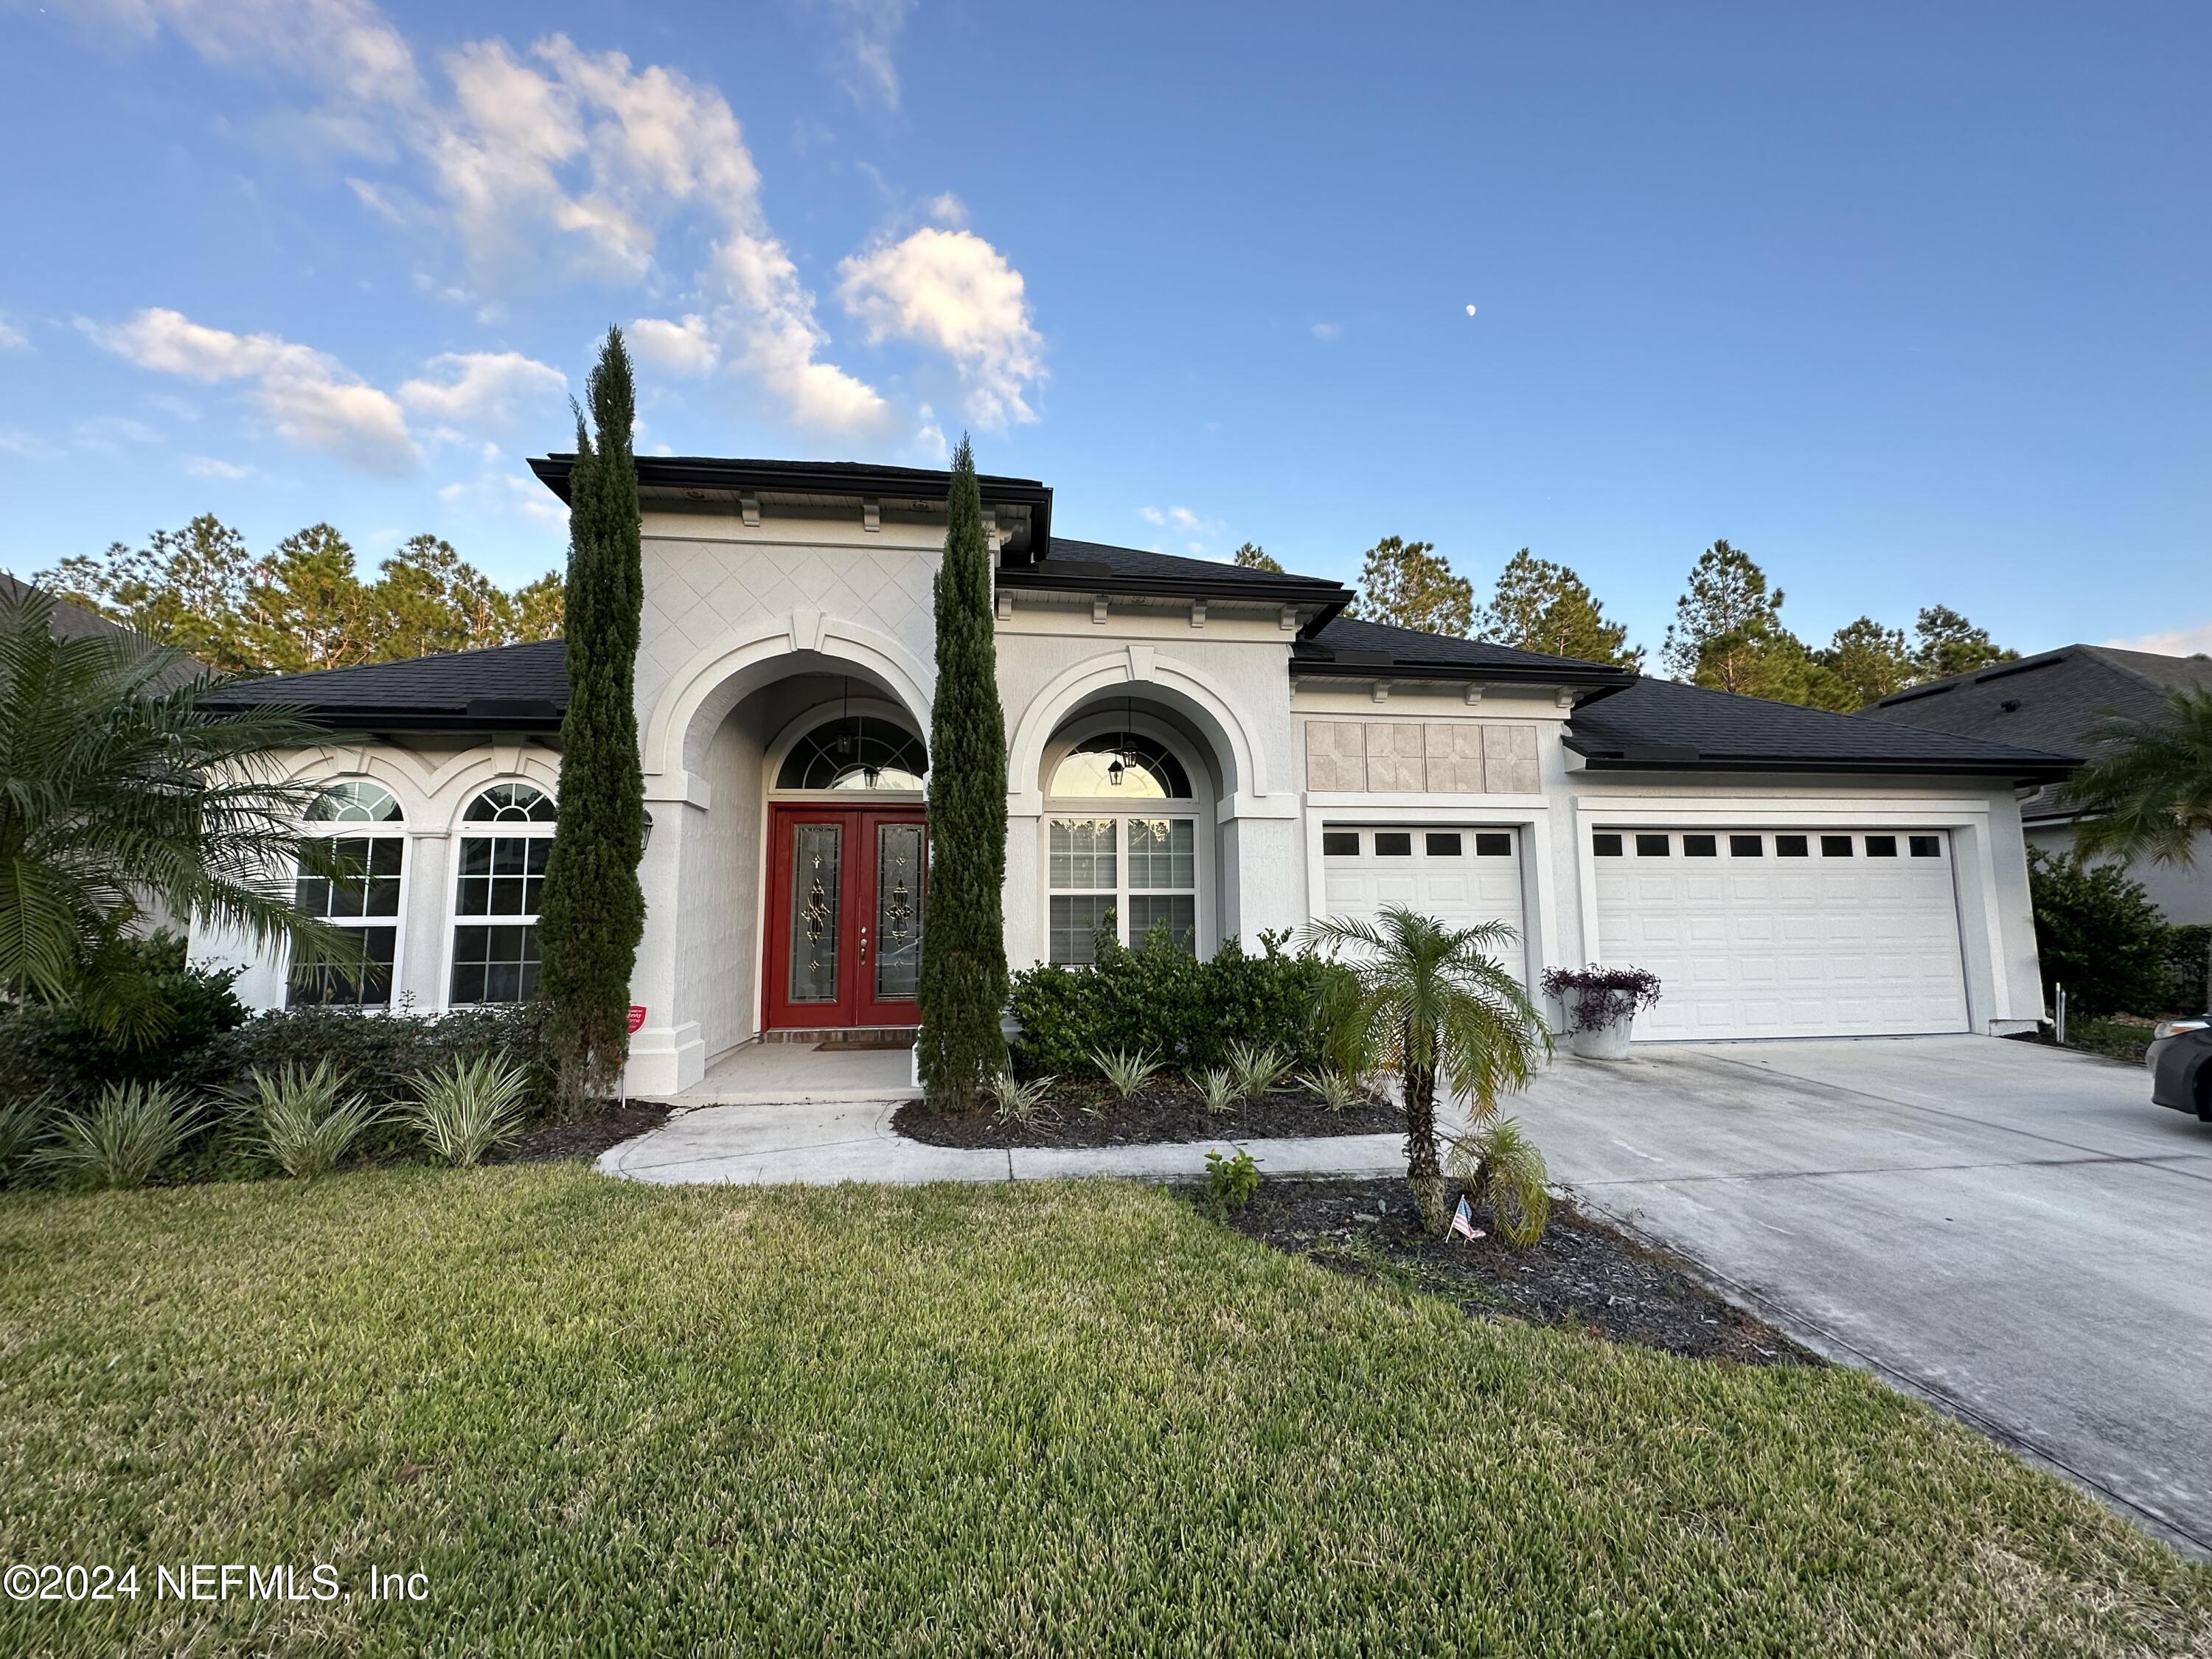 St Johns, FL home for sale located at 225 Michaela Street, St Johns, FL 32259